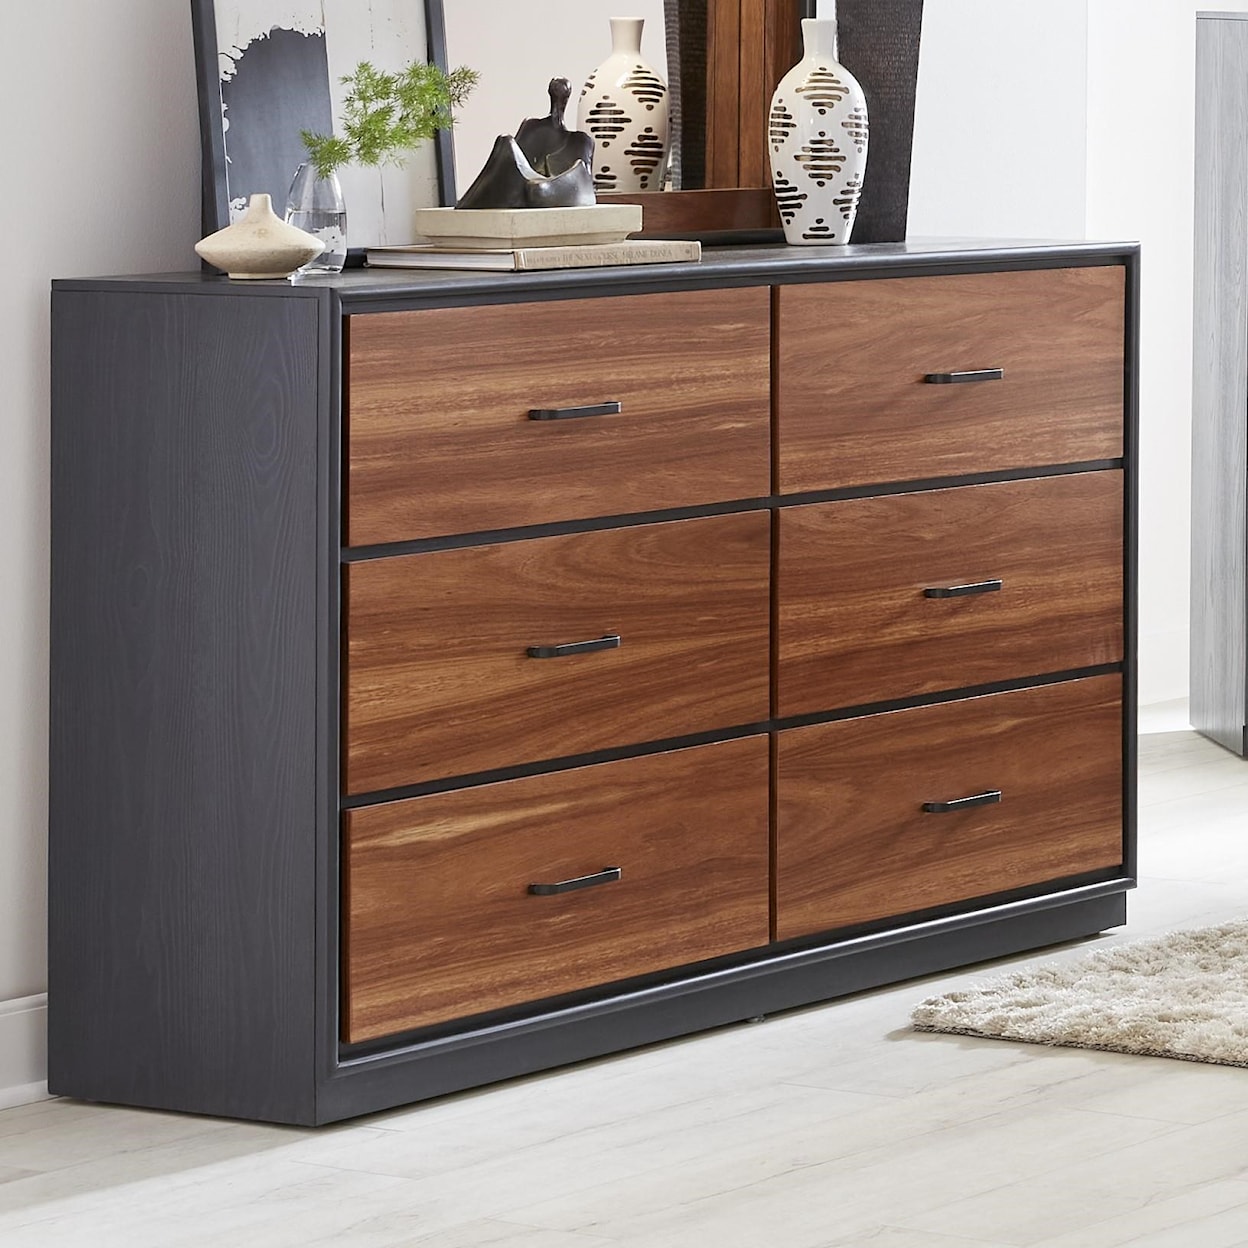 Lifestyle Madison King 5 Pc Bedroom Group